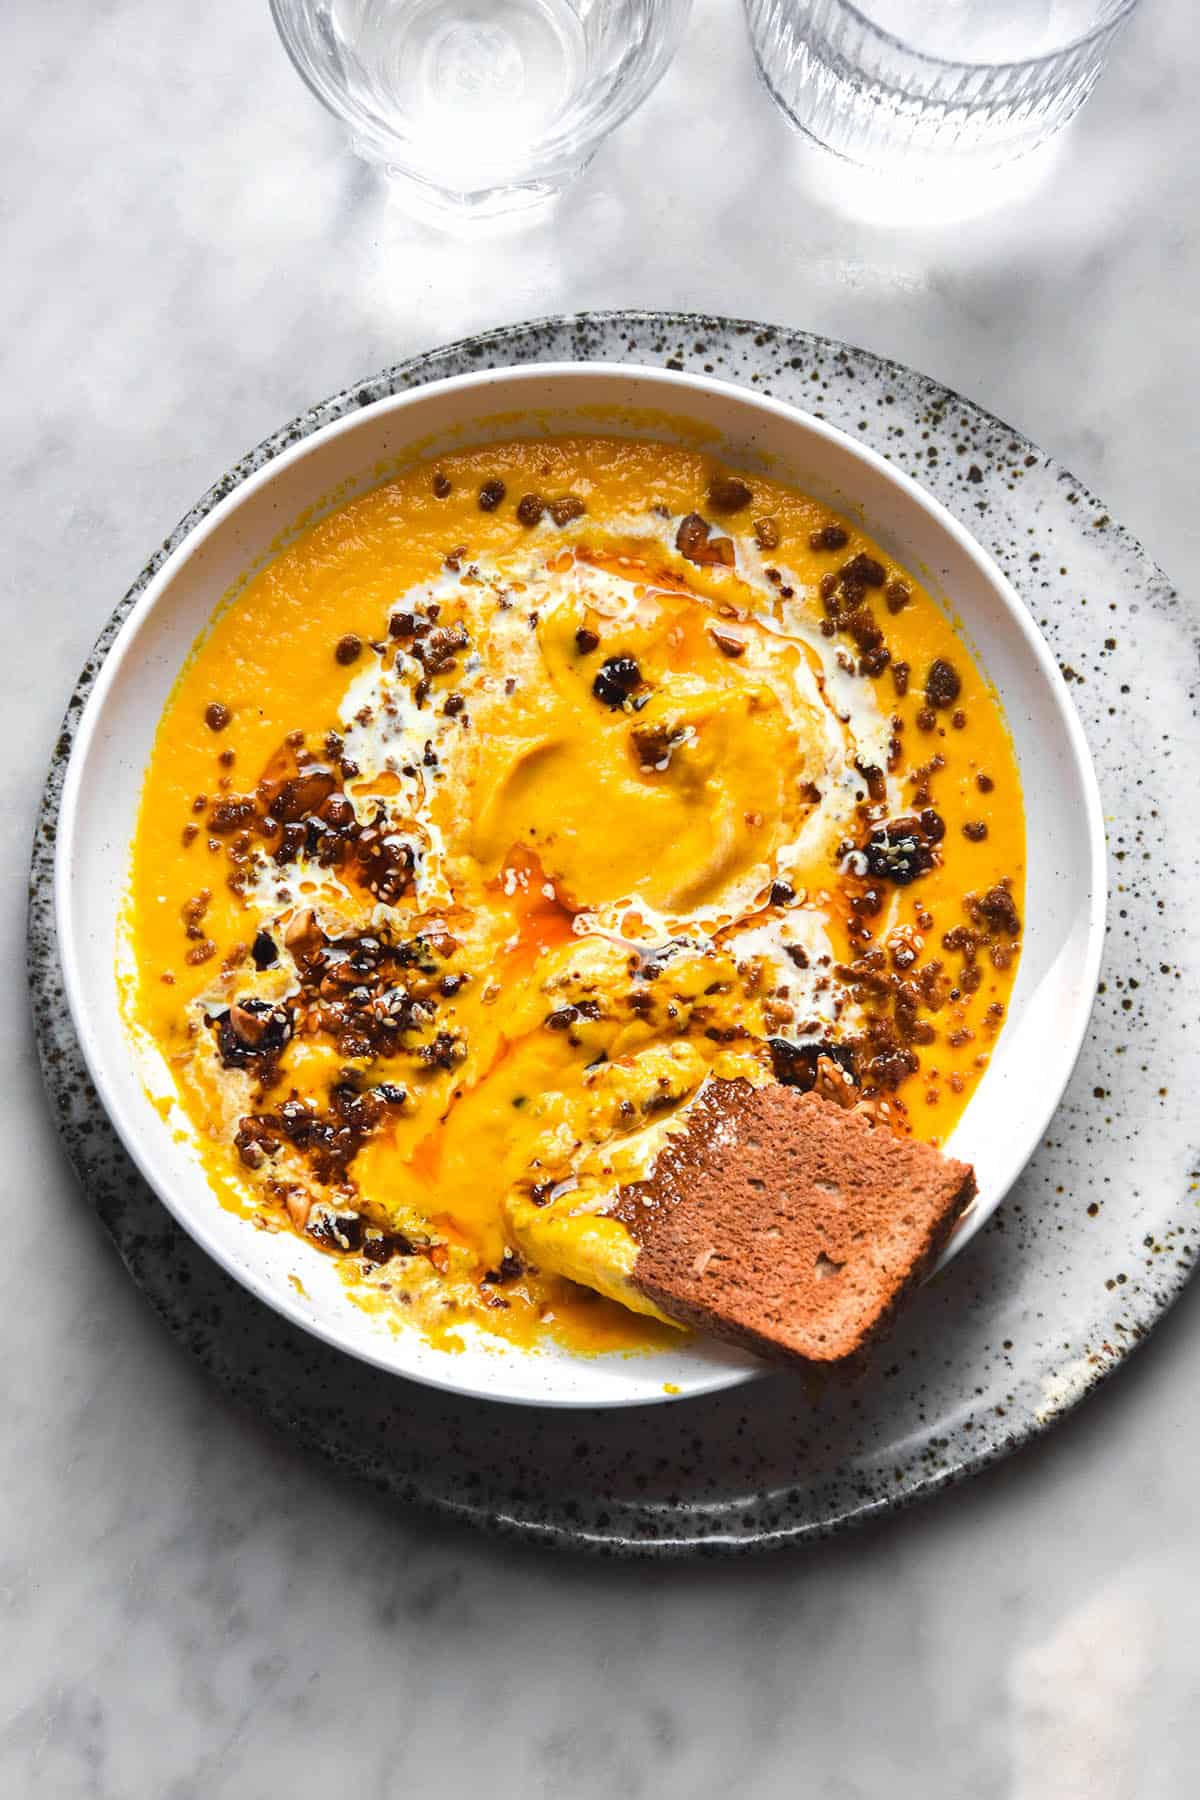 An aerial brightly lit image of a white bowl filled with low FODMAP carrot soup. The soup is topped with a swirl of low FODMAP chilli crisp, tofu crumbles and cream and a slice of toast. The bowl sits on a white speckled ceramic plate atop a white marble table.